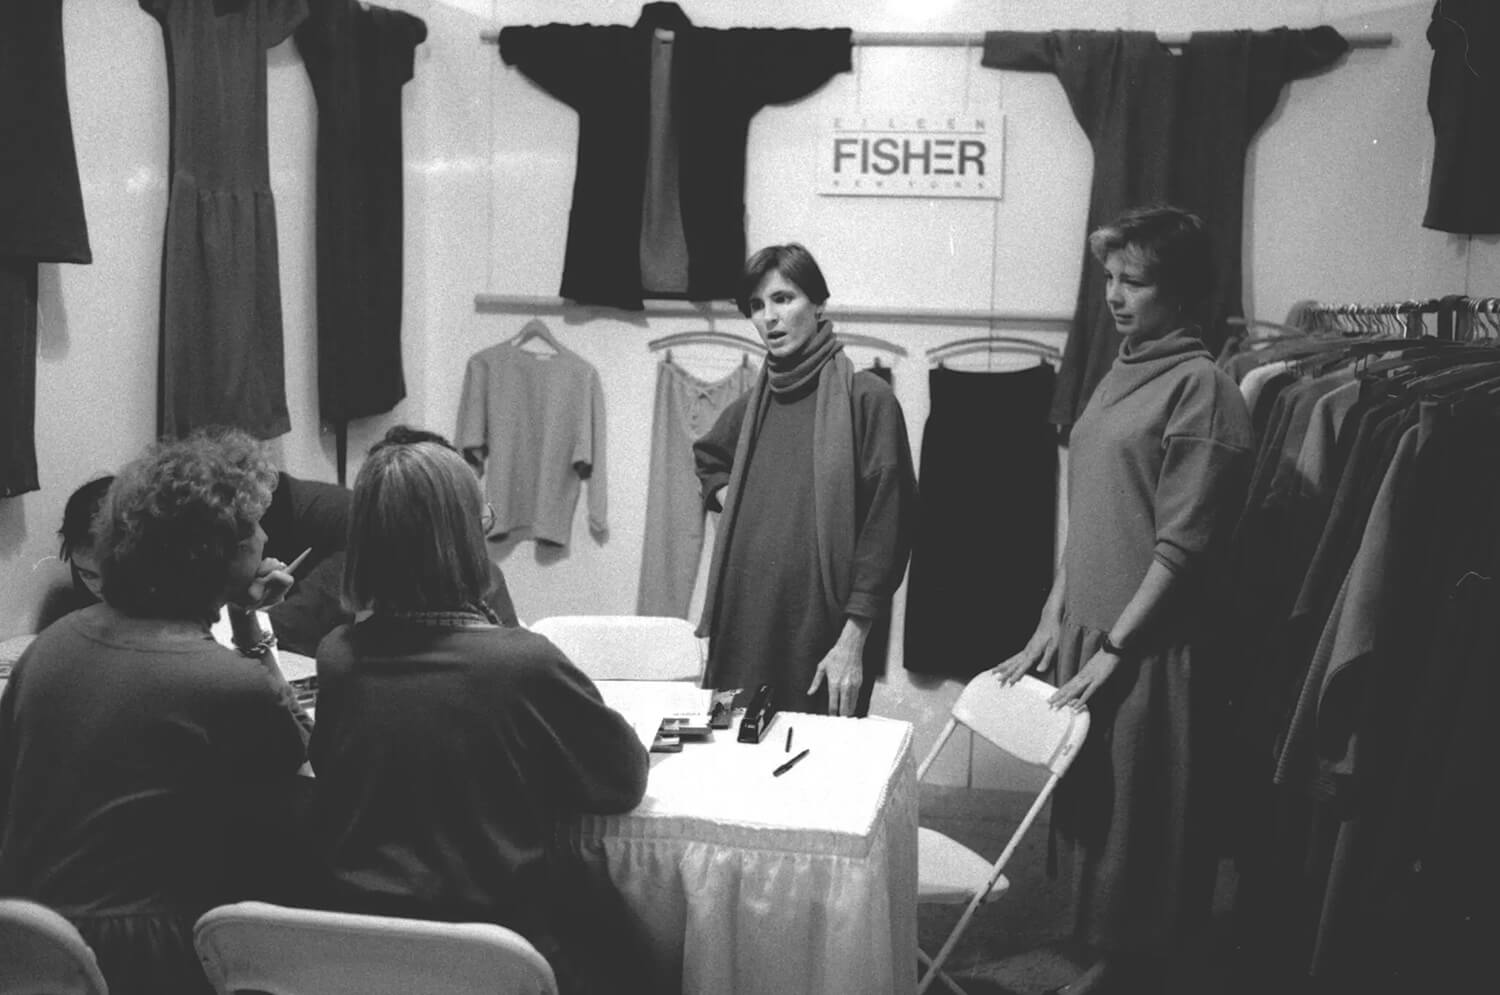 How Eileen Fisher's Fall 2017 Campaign Is Promoting Power in